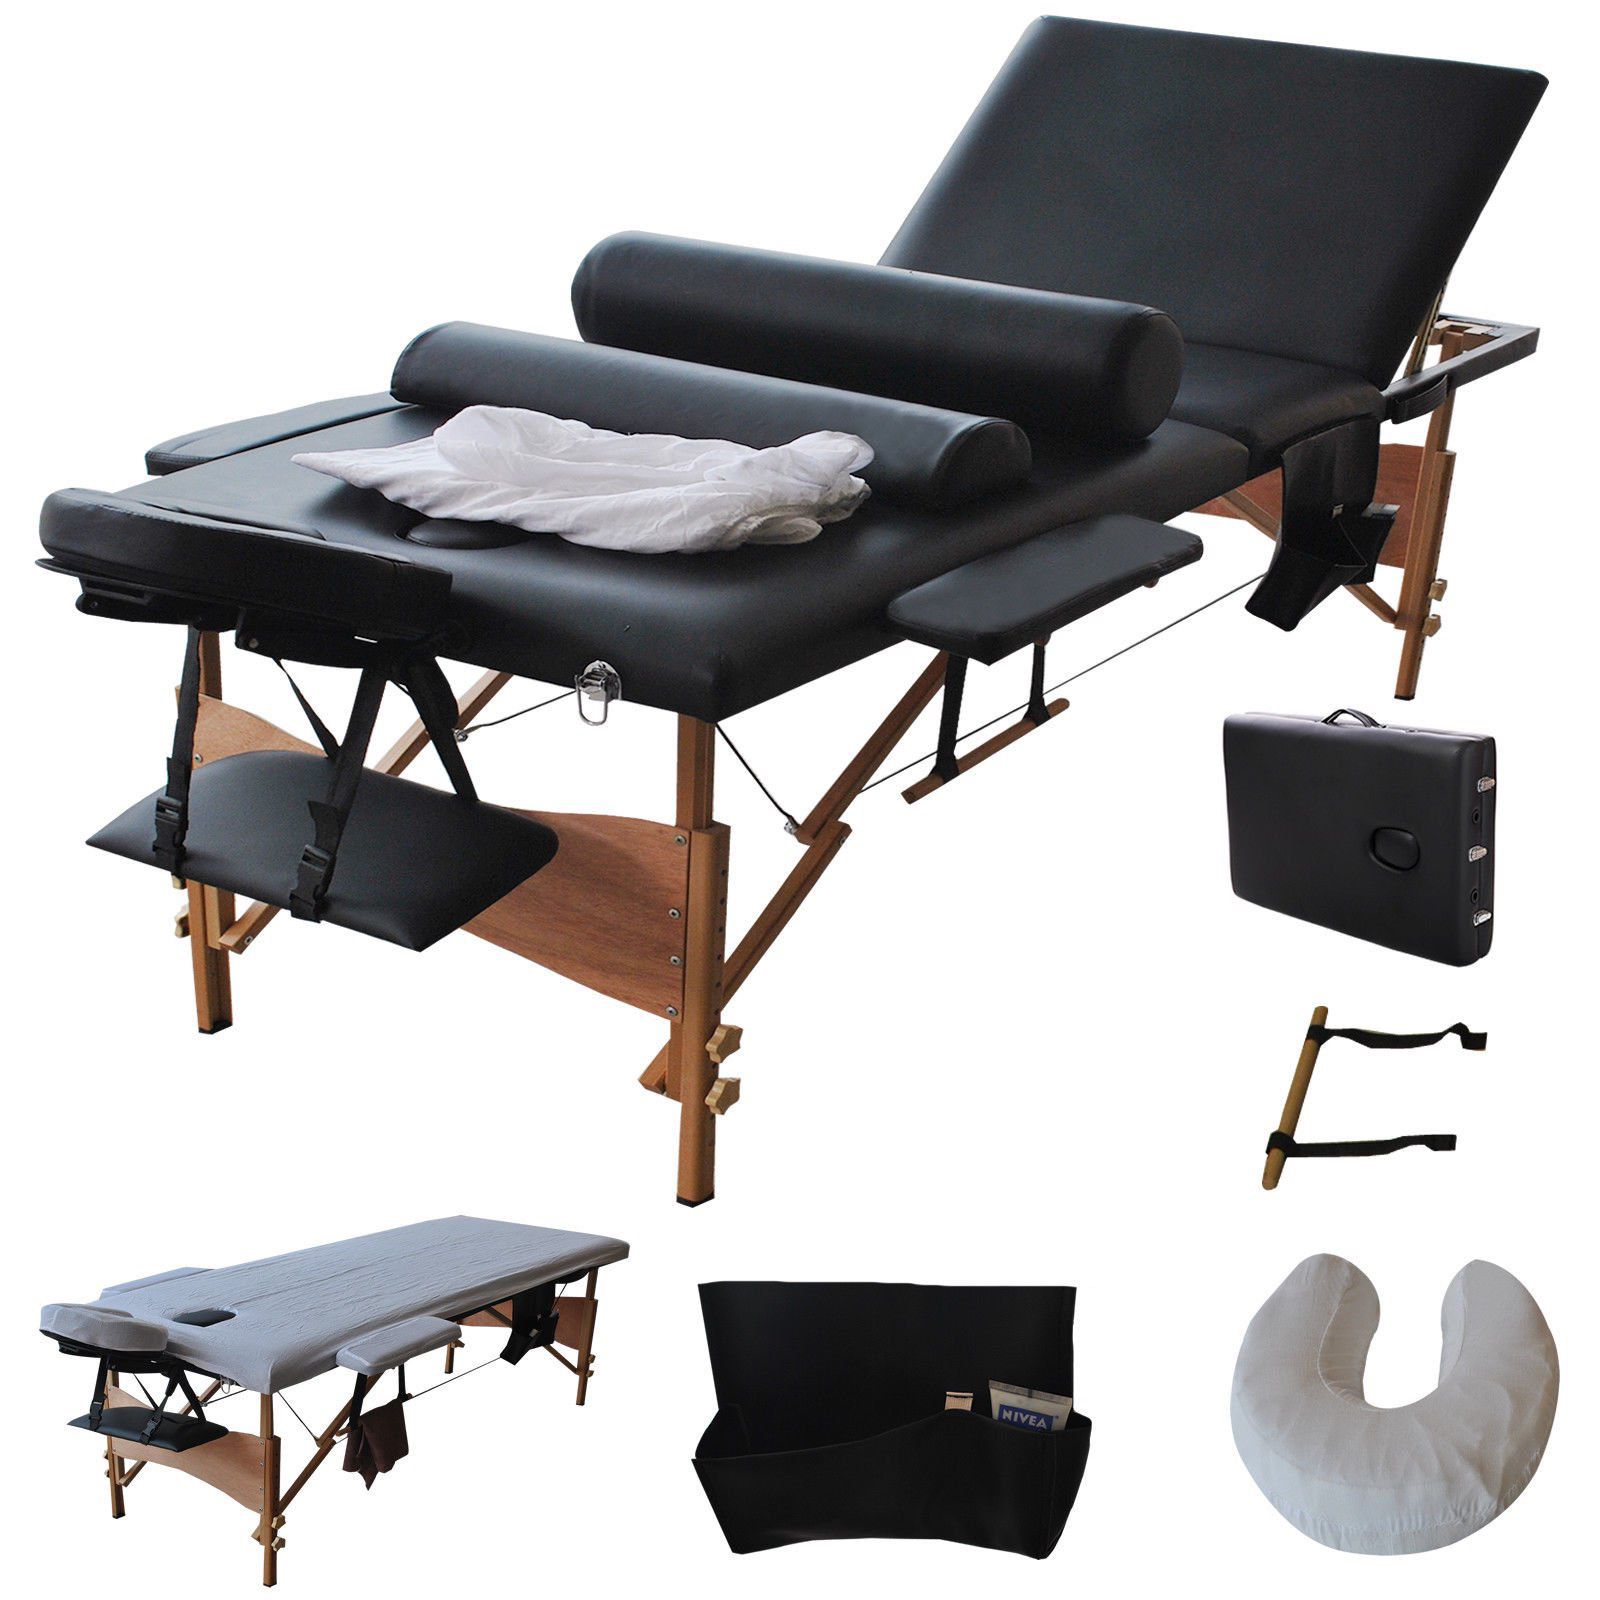 Brand New Costway 84"l 3 Fold Massage Table Portable Facial Bed W/sheet+cradle Cover+2 Bolster